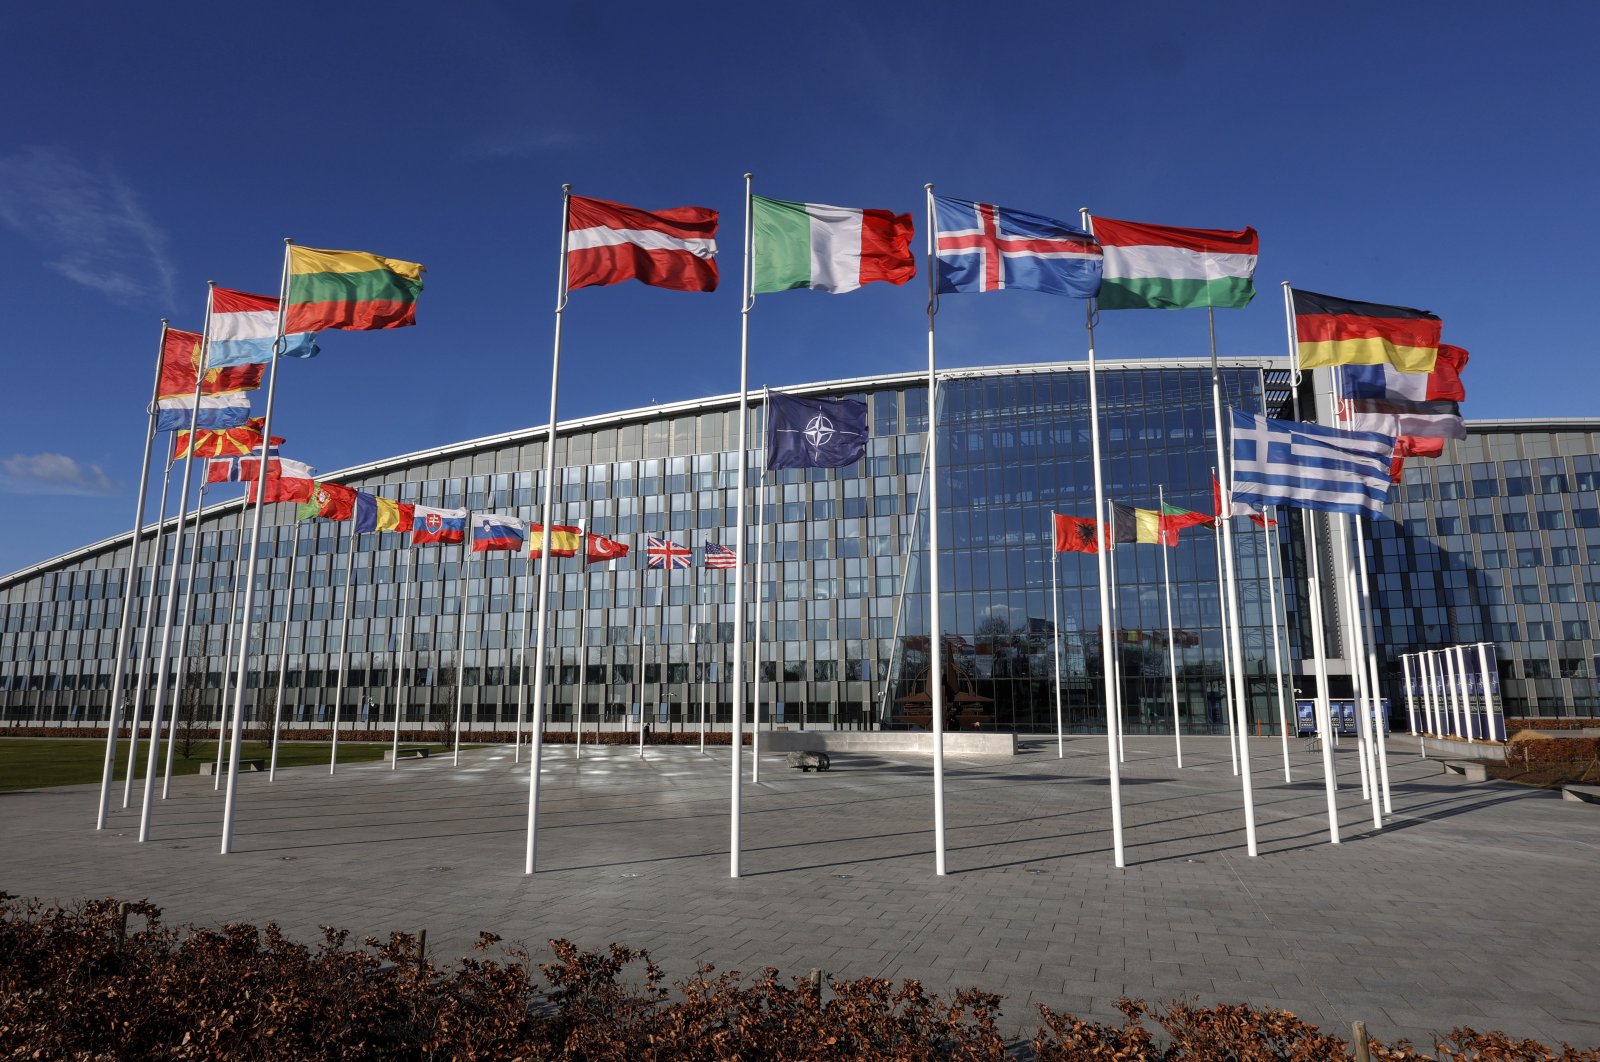 FILE - Flags flutter in the wind outside NATO headquarters in Brussels, Feb. 7, 2022. Finland and Sweden have signaled their intention to join NATO over Russia’s war in Ukraine and things will move fast once they formally apply for membership in the world’s biggest security alliance. Russian President Vladimir Putin has already made clear that there would be consequences if the two Nordic countries join.  (AP Photo/Olivier Matthys, File)